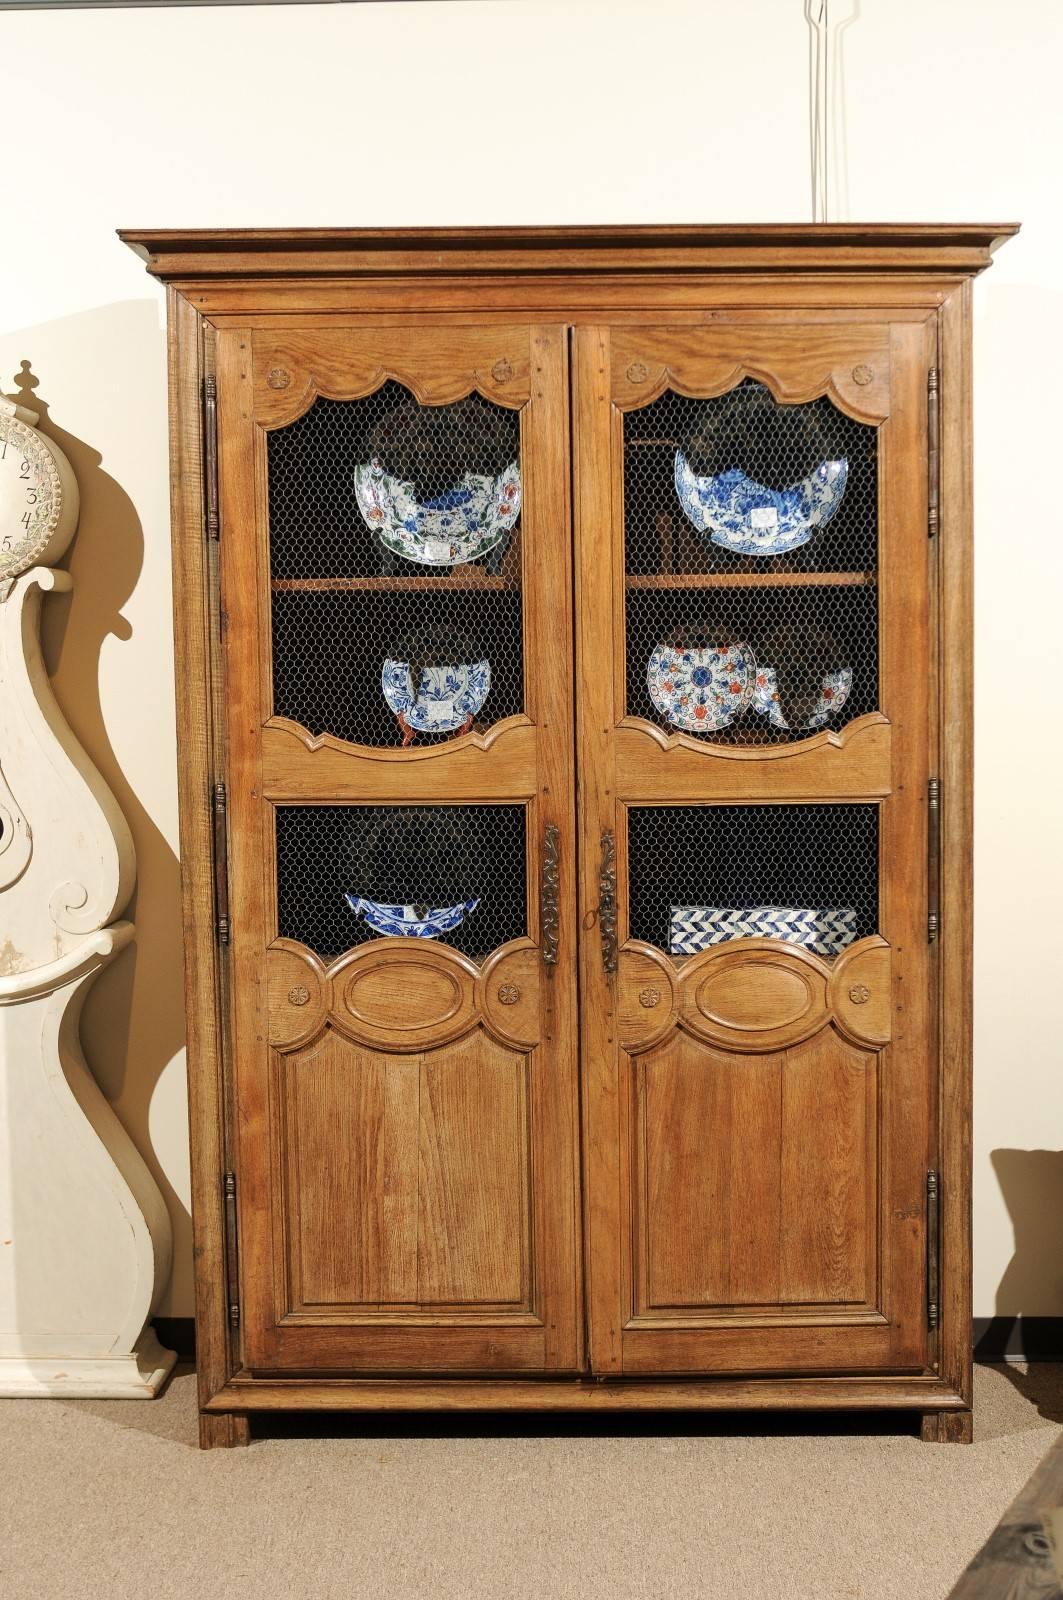 19th century French armoire, circa 1890
This is an attractive armoire we found in Brittany. The chicken wire has been added to give a different use to the piece. The open look affords the owner some flexibility as to the use. The straight lines and